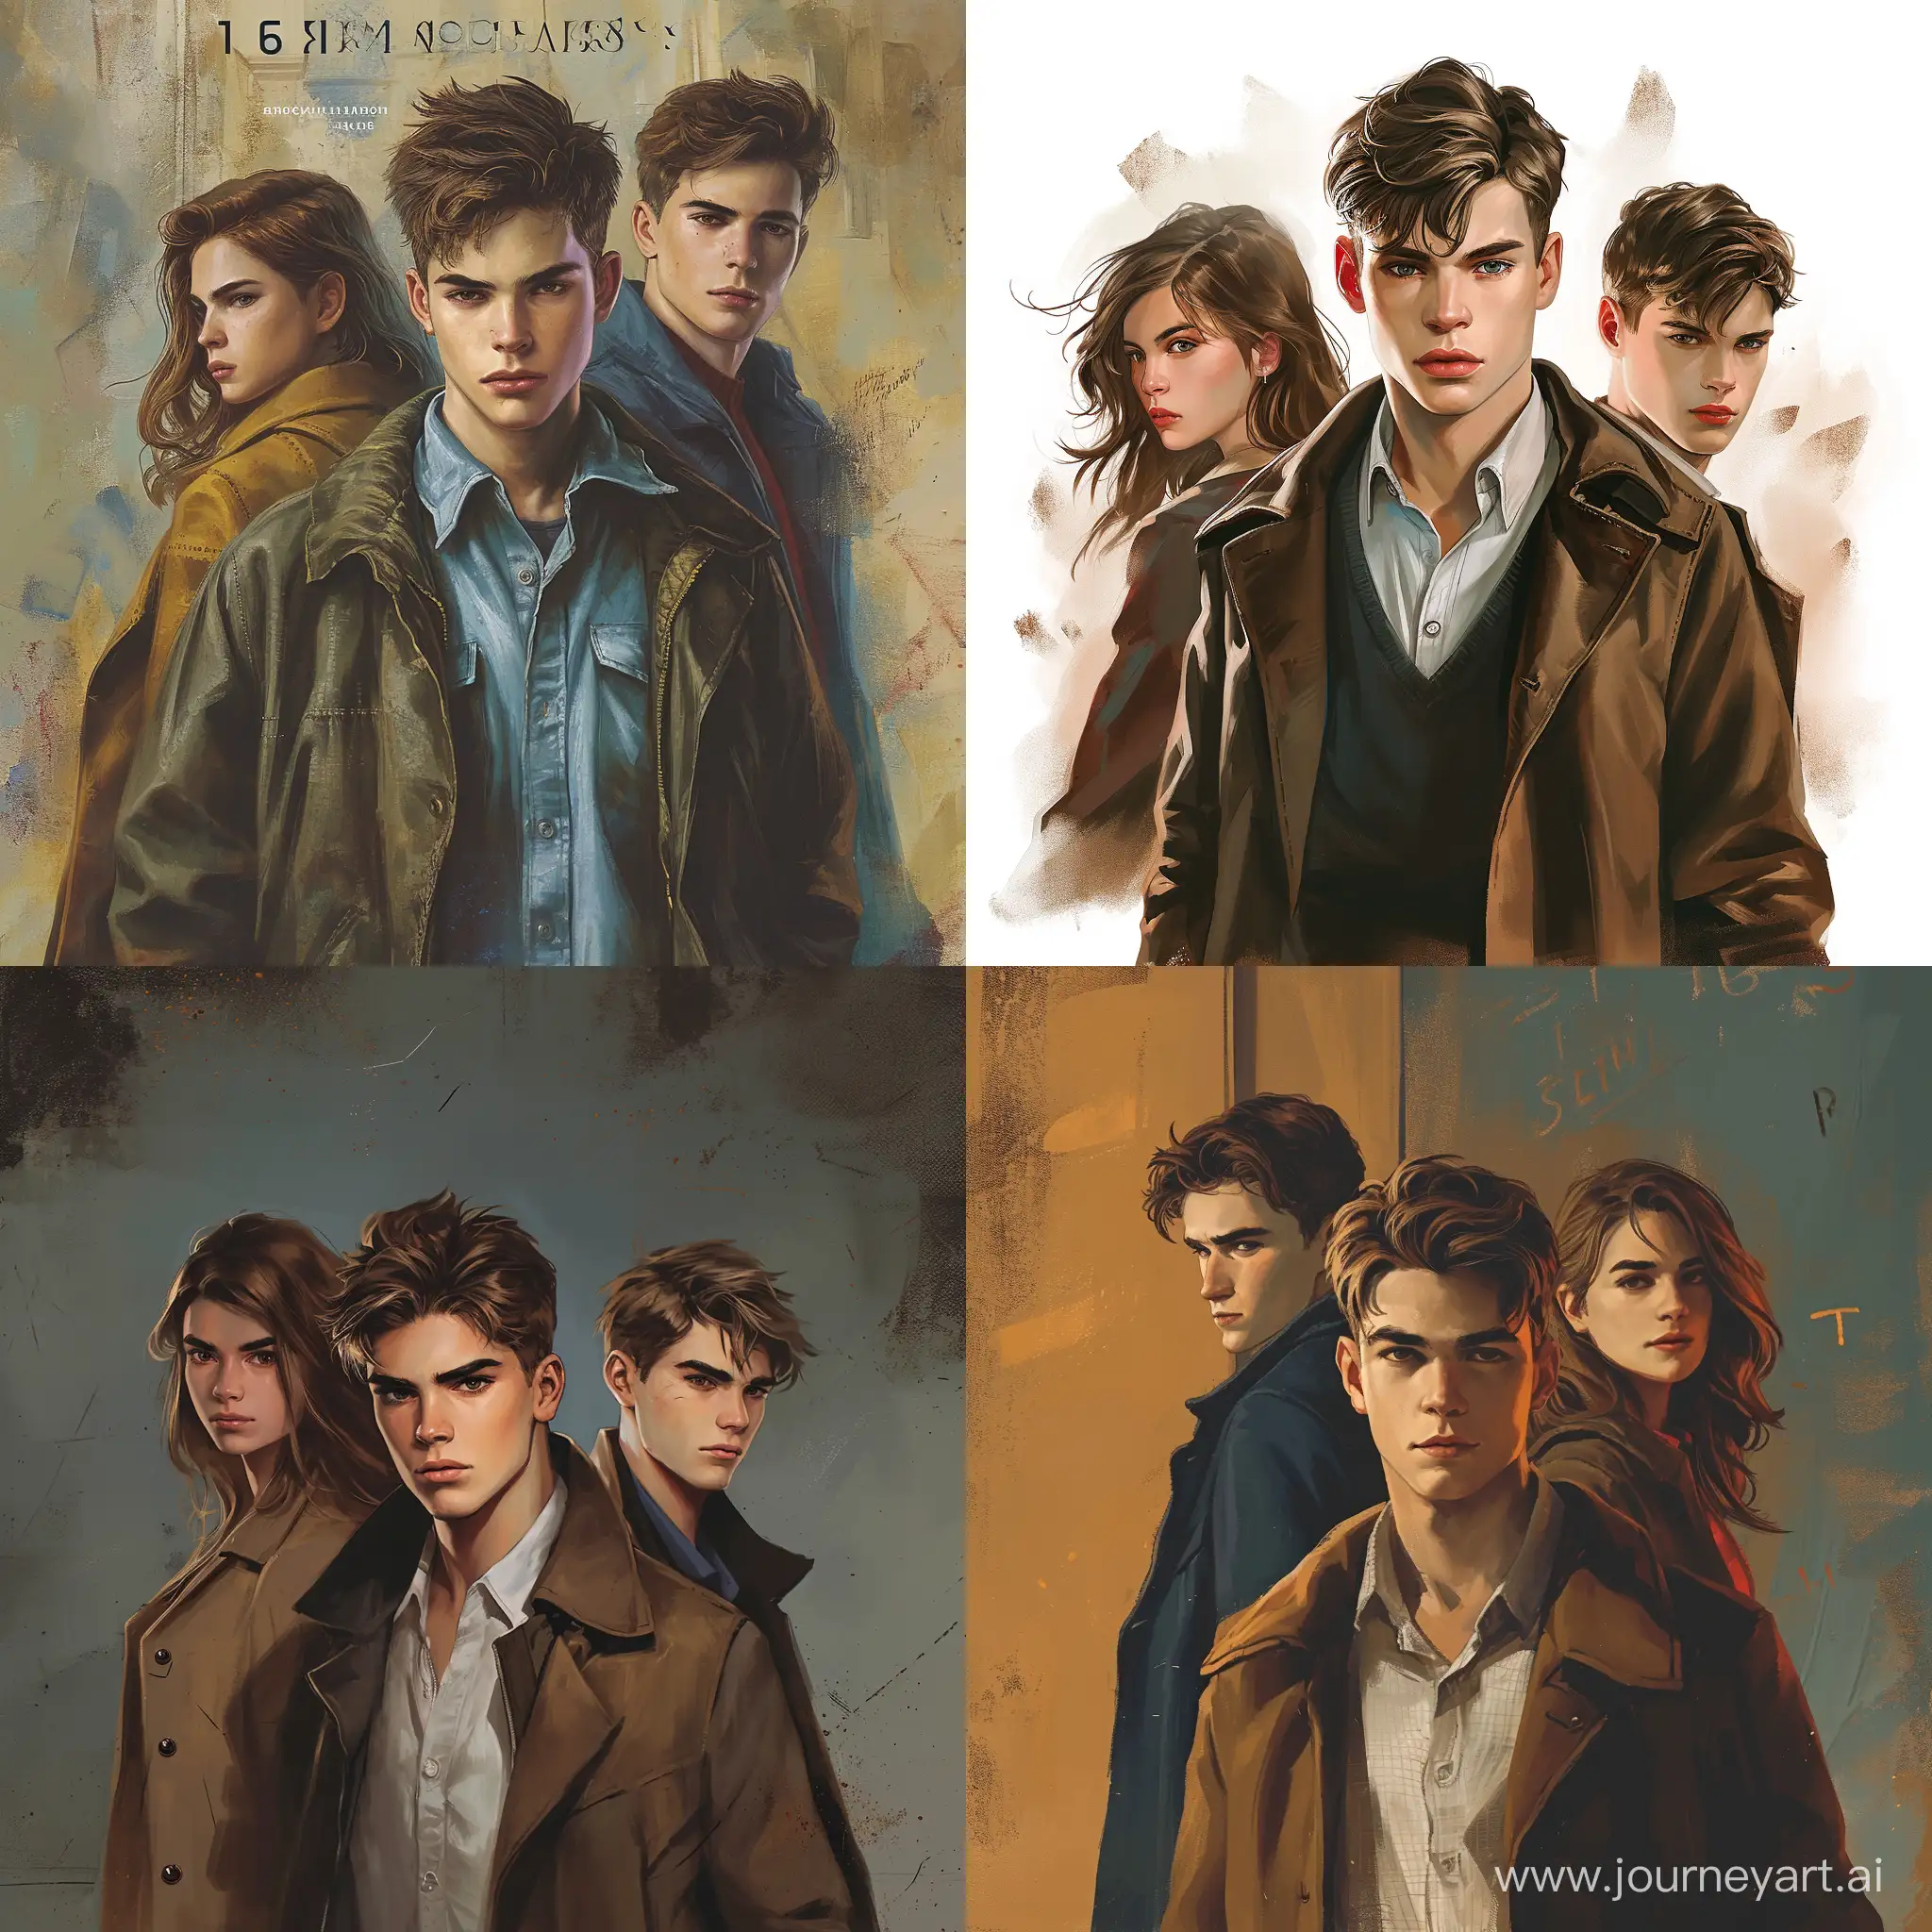 Create a cover for the book. There should be only three main characters in the picture, no inscriptions! In the center is a smart, handsome, serious, but kind teenager, he is 16 years old. Behind his back or next to him is the less intelligent, but very cheerful younger brother of the hero (he is shorter and stouter) and his girlfriend, a beautiful smart sweet girl. The brothers are different, they don't look like each other. The figures and faces of the characters should be as real as possible, as in the photo. The main character's clothing style is a shirt without a tie (or a sweater) and an open coat, while his brother's is typically teenage.